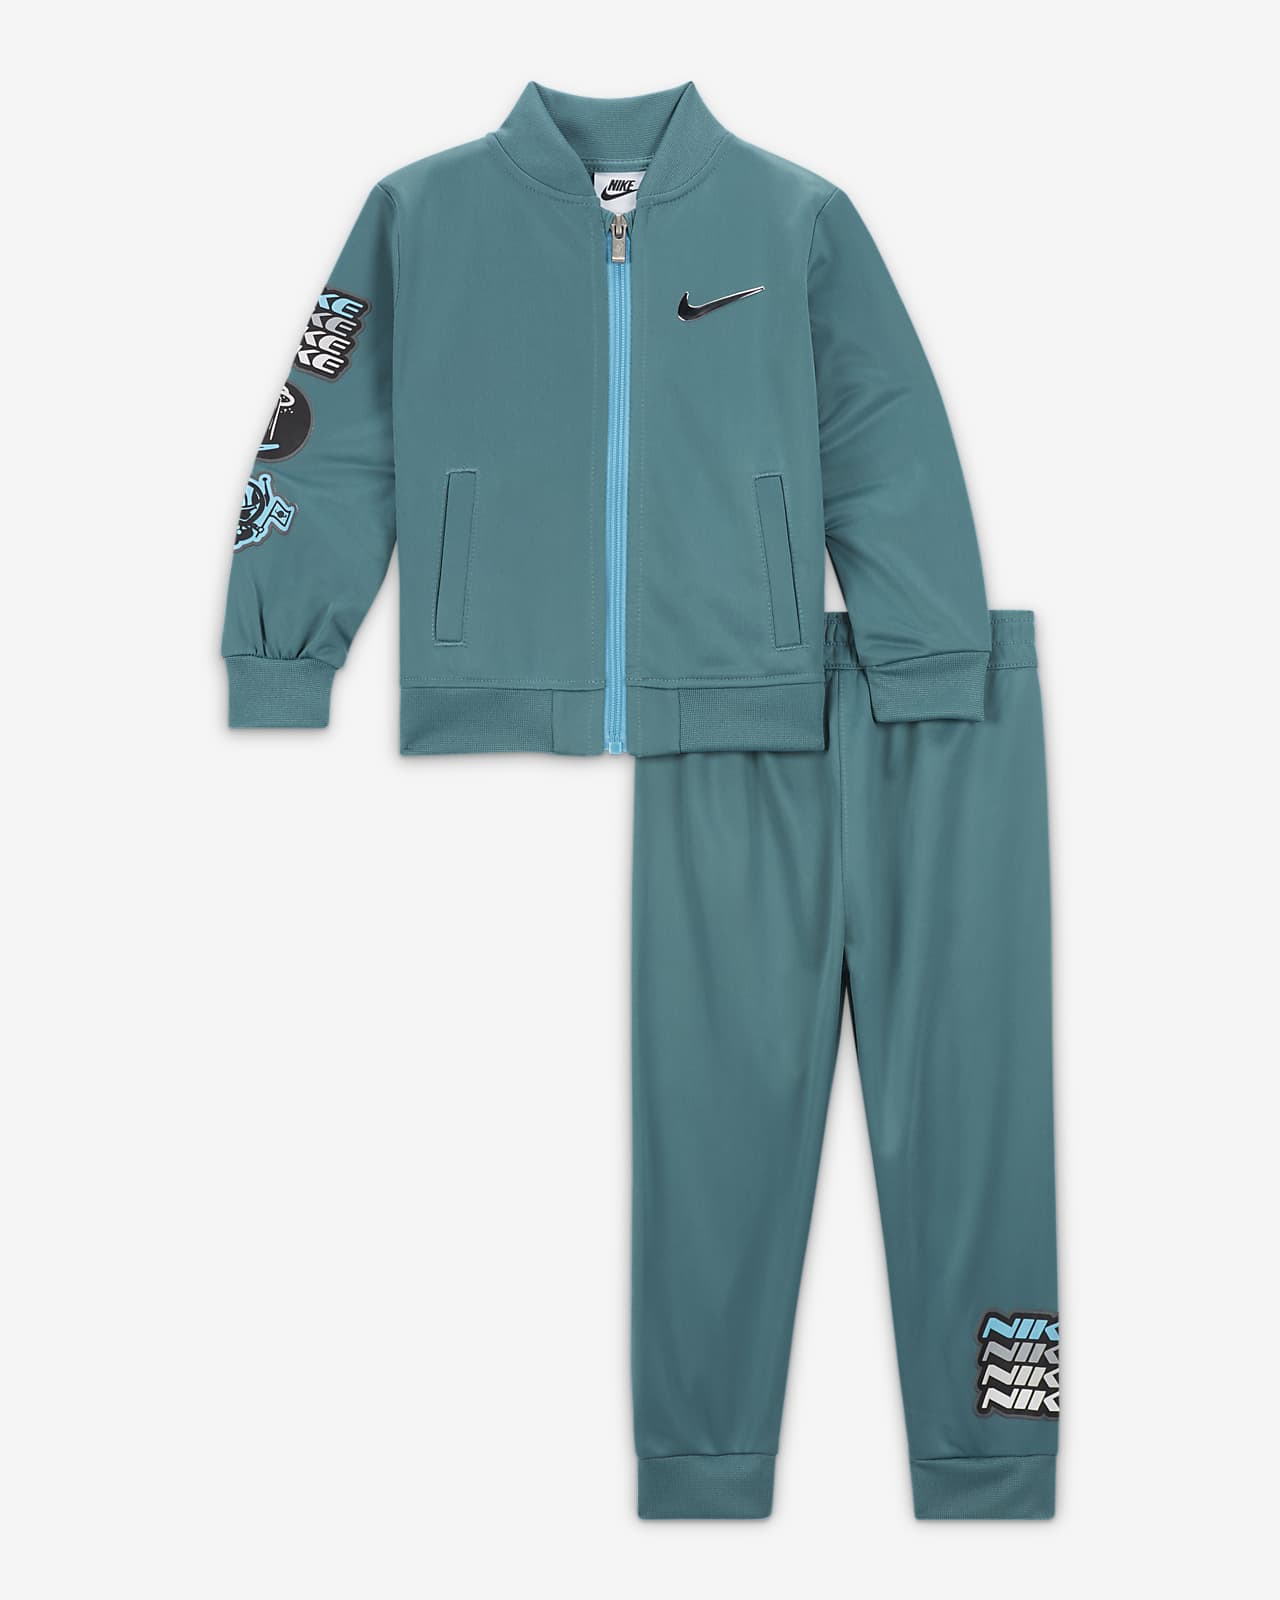  Nike Girls NSW Track Suit Tricot Kids Bv2769-010 Size S :  Clothing, Shoes & Jewelry